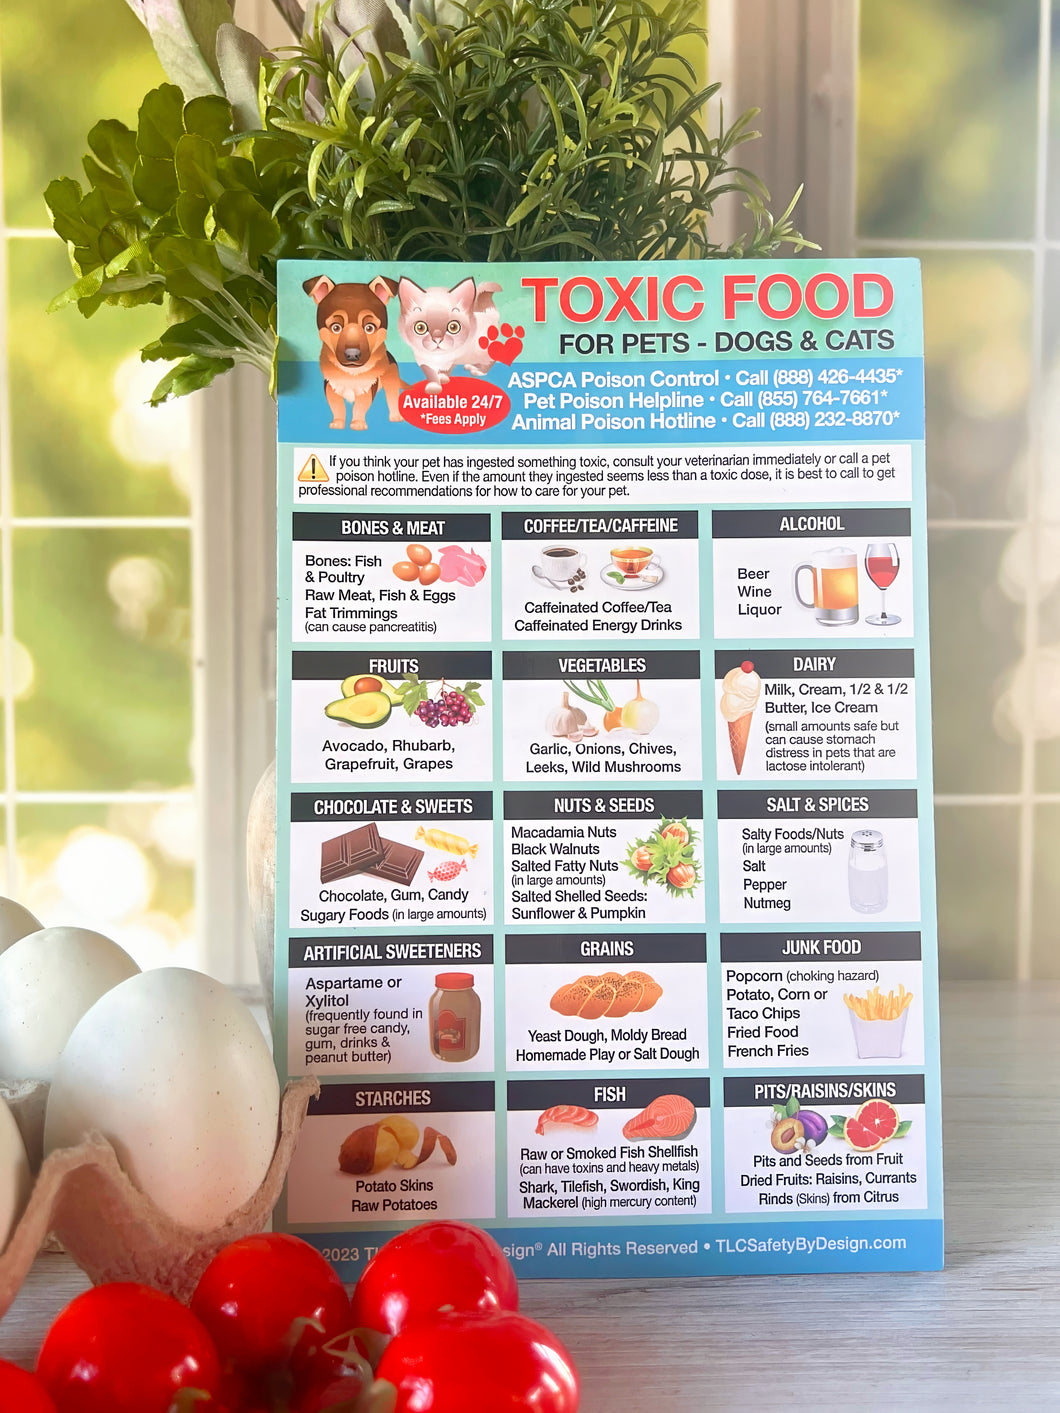 Toxic Harmful Foods for Pets 5.5” x 8.5” Fridge Safety Magnet Dogs Cats Poison Emergency Veterinarian Approved